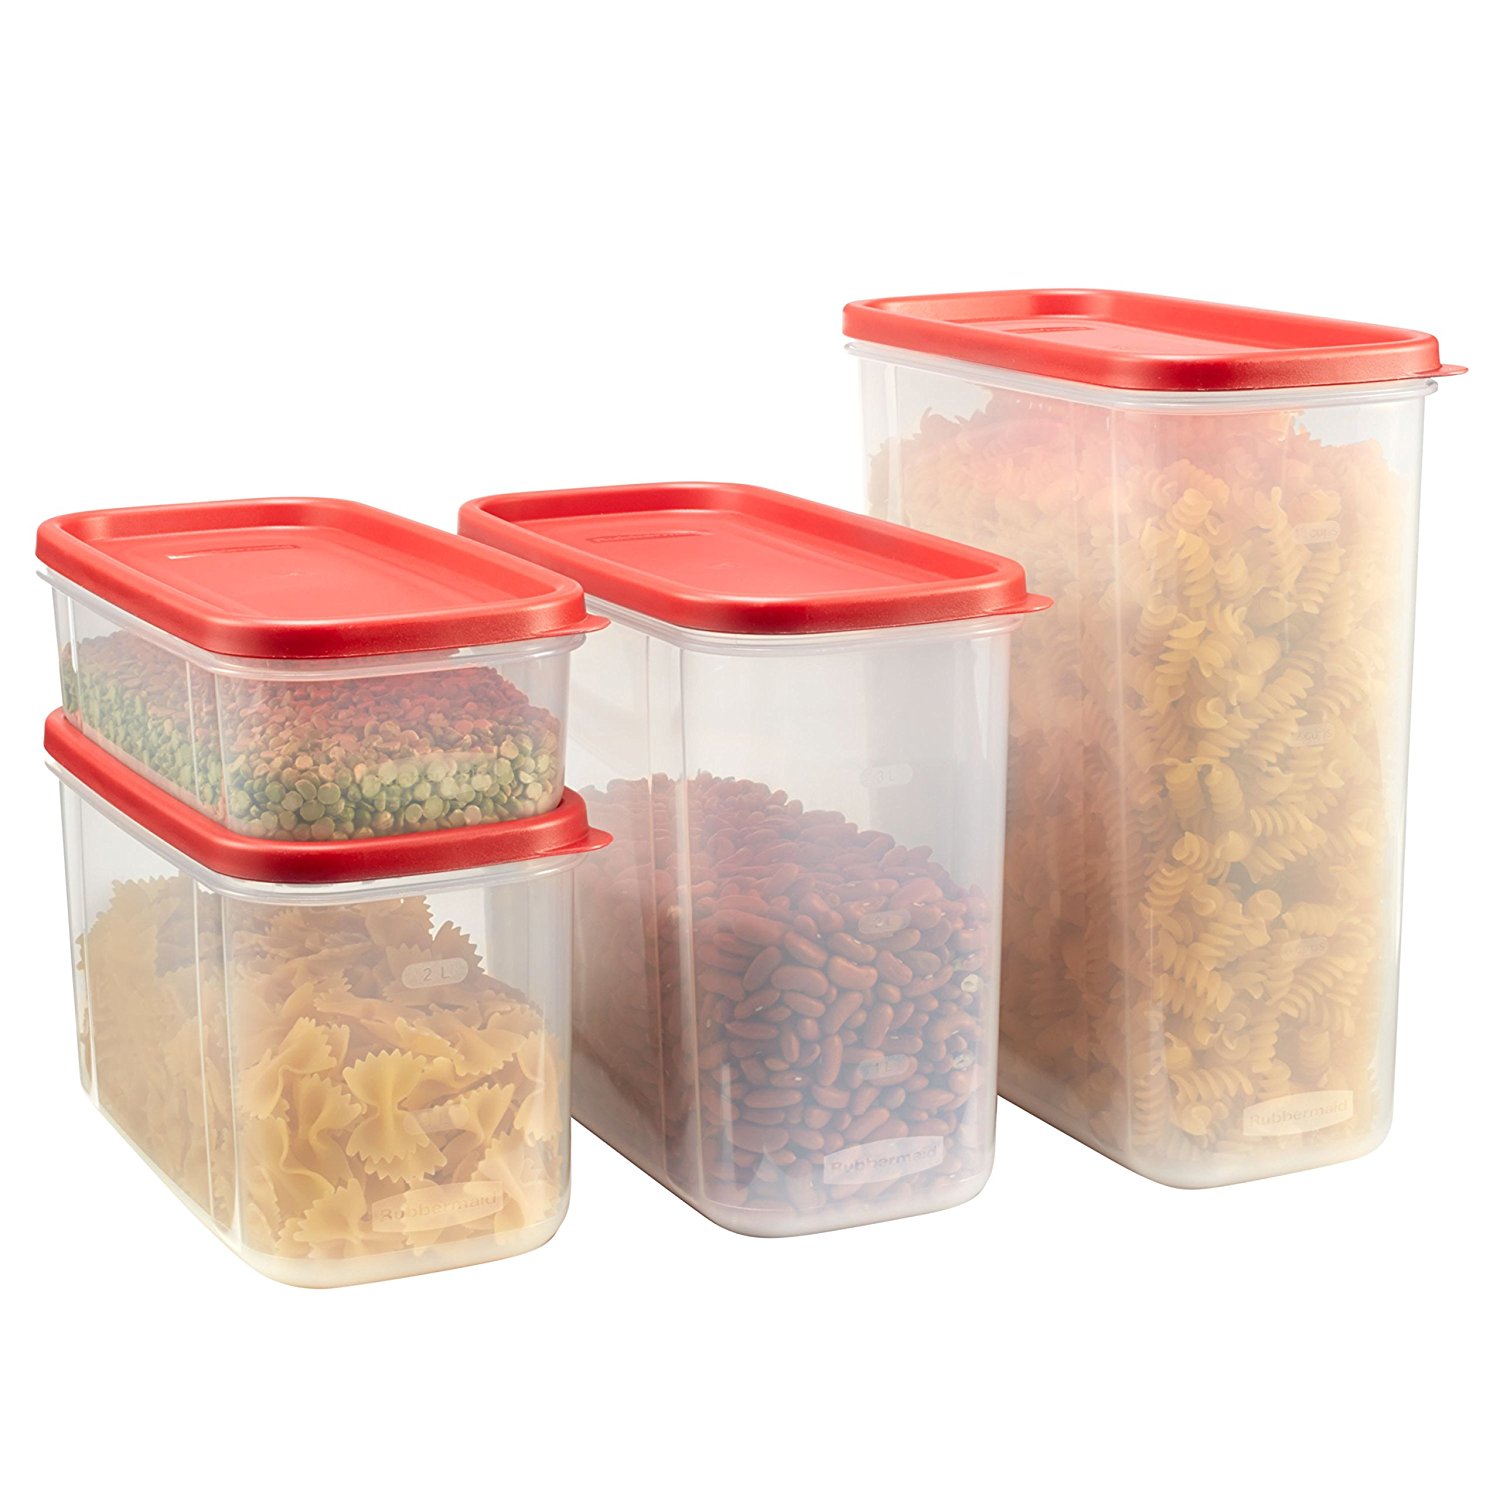 Rubbermaid Modular Canisters, Food Storage Containers – 8-piece Set – Just $15.97!